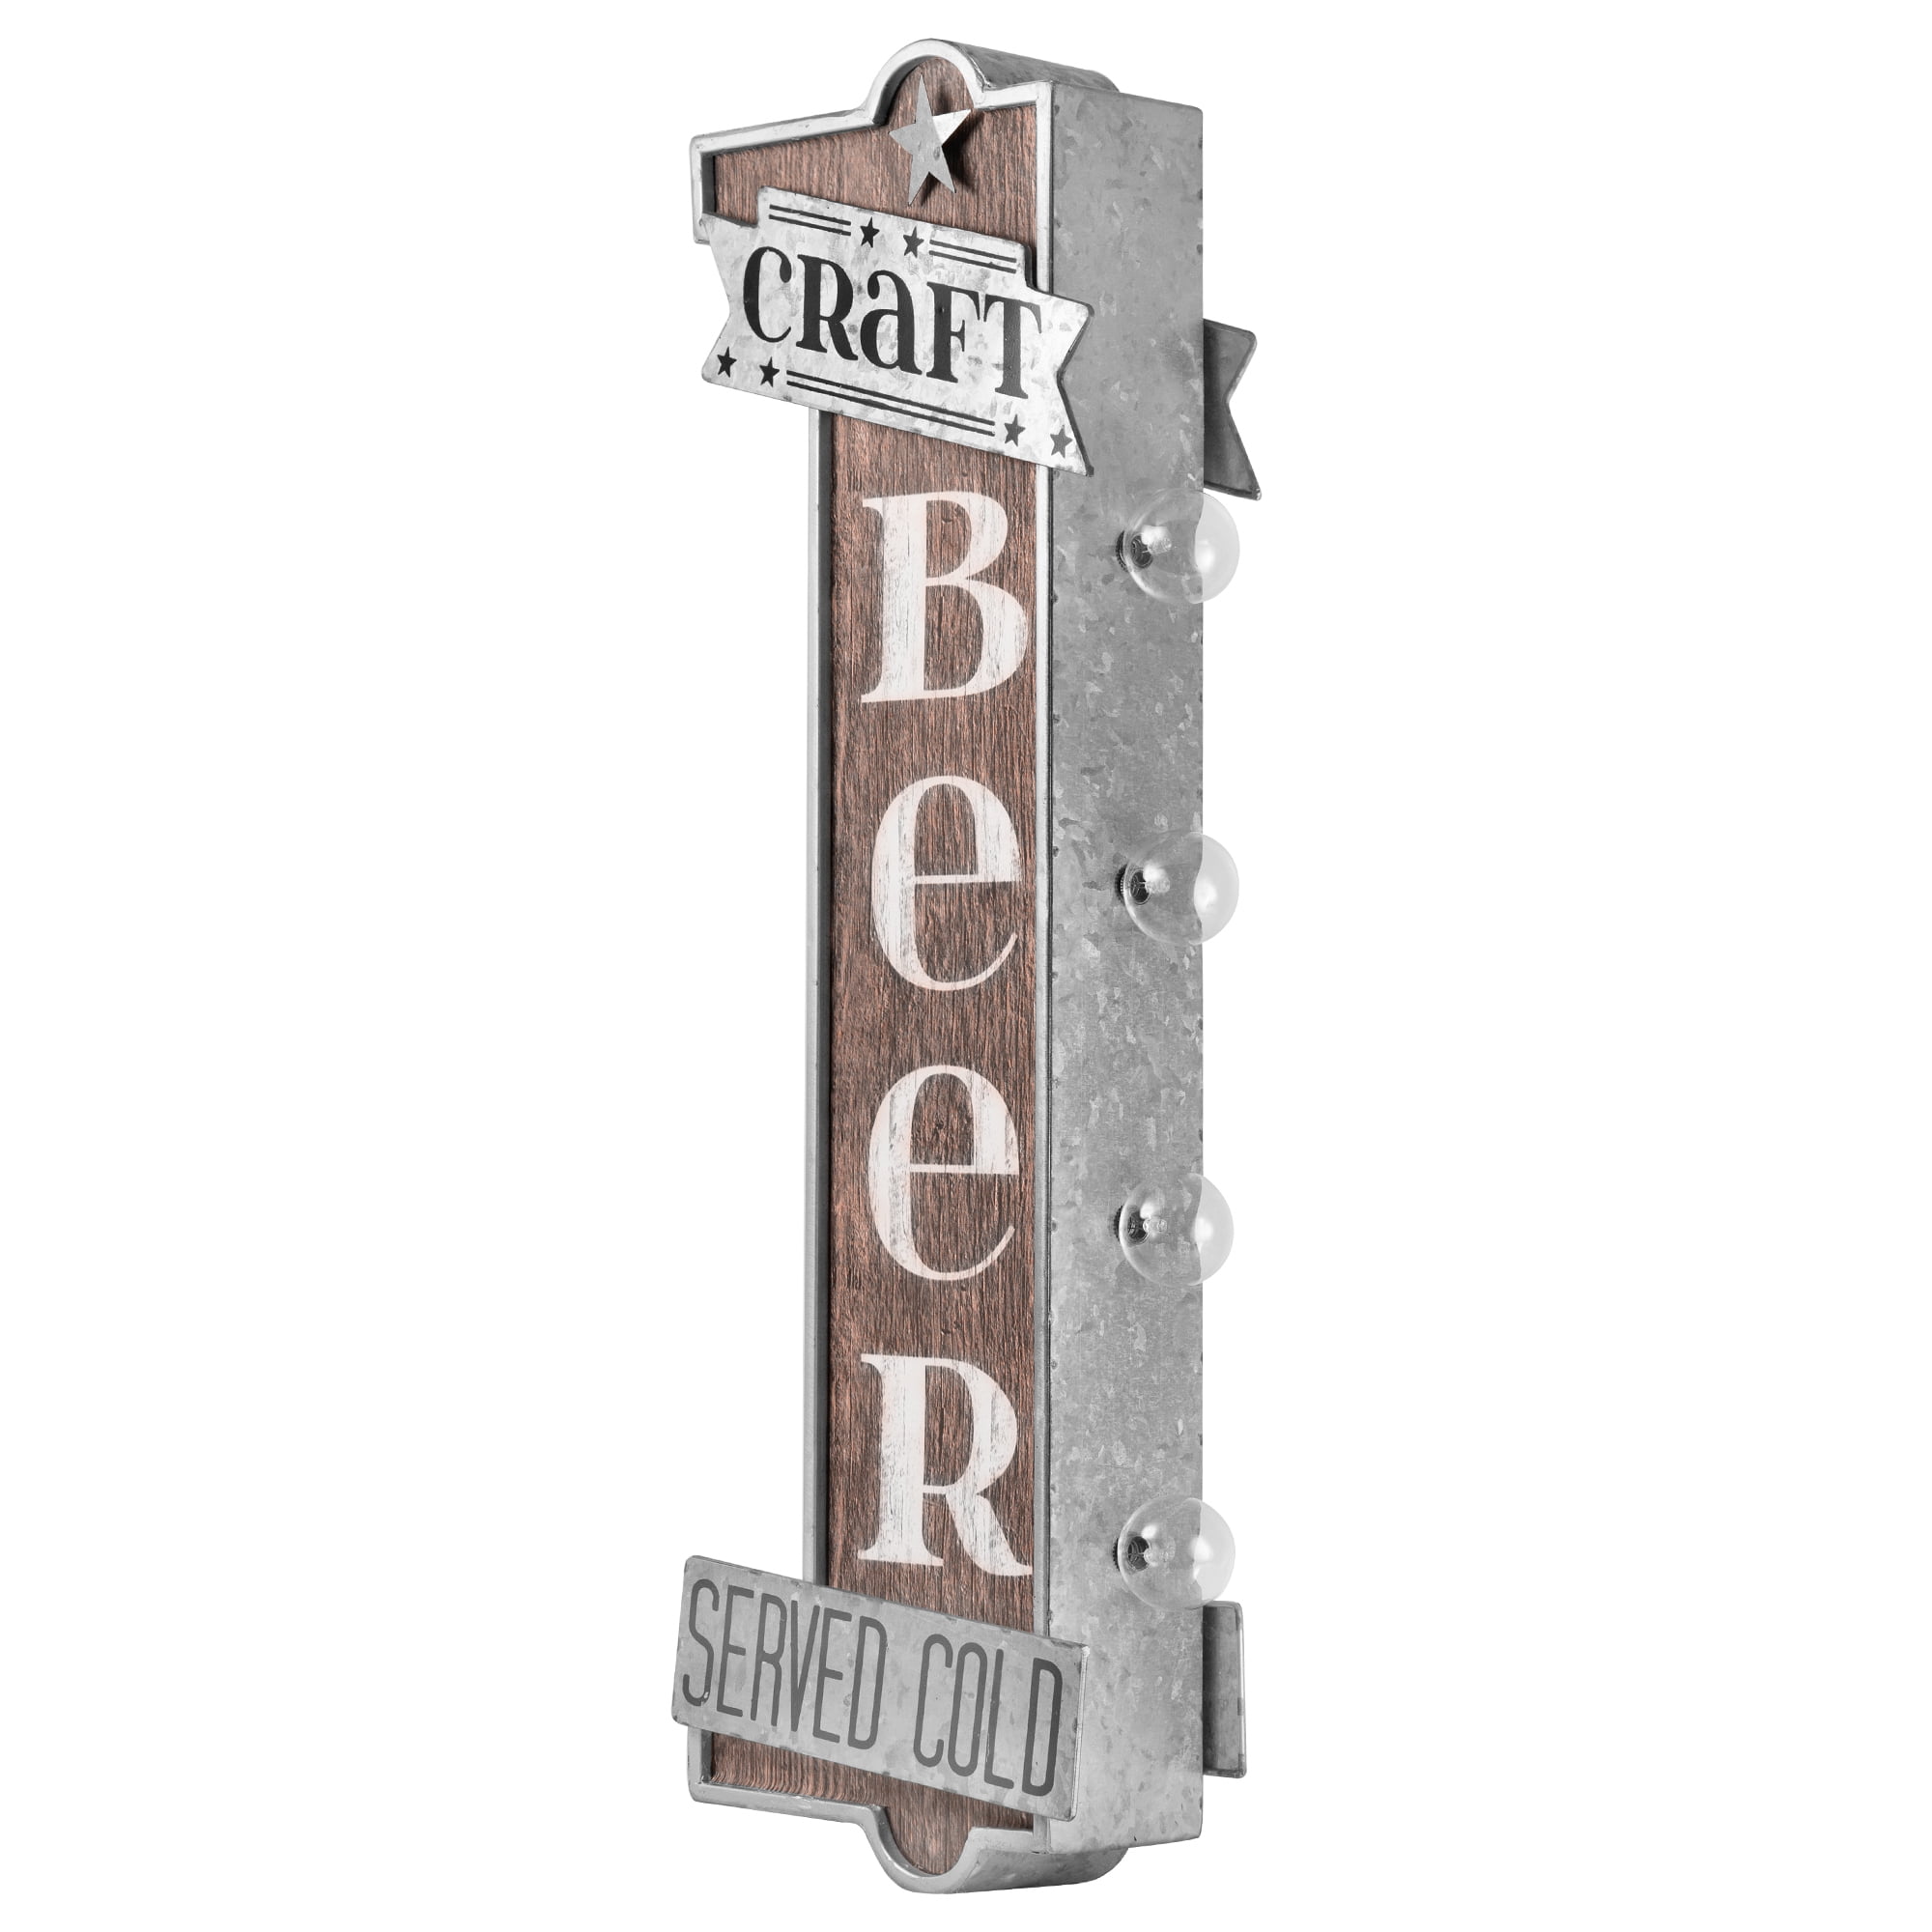 Craft Beer Bar Decor Man Cave Pub Public House & Brewery Double Sided LED Sign 